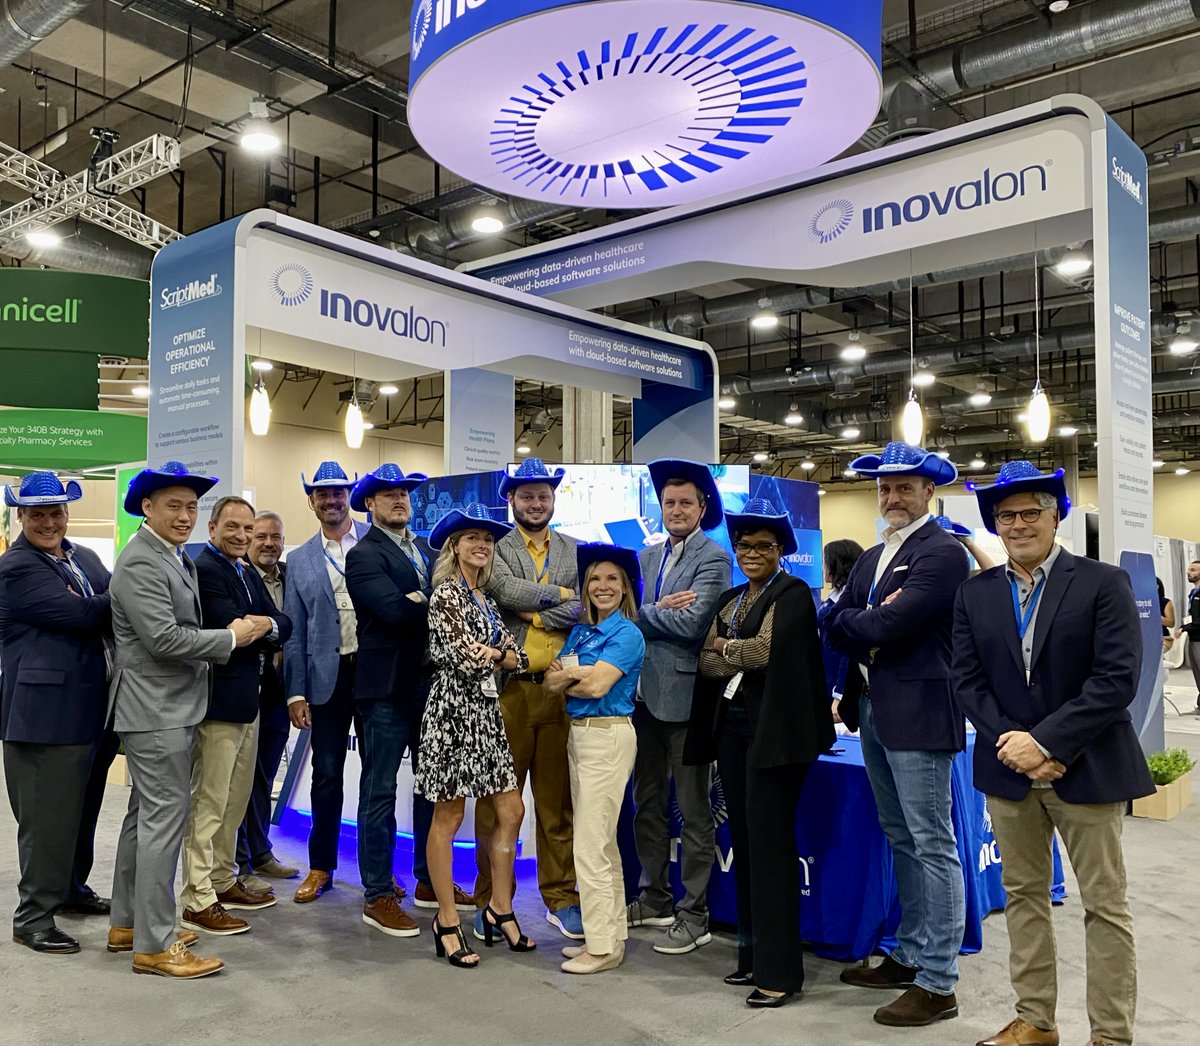 At #NASPAnnual2023? Our Pharmacy team is onsite, ready to chat with you about how ScriptMed® solutions deliver SaaS-based data analytics to help pharmacies across the specialty continuum. Stop by booth 305 and pick up your electric blue cowboy hat. #ThisIsNASP